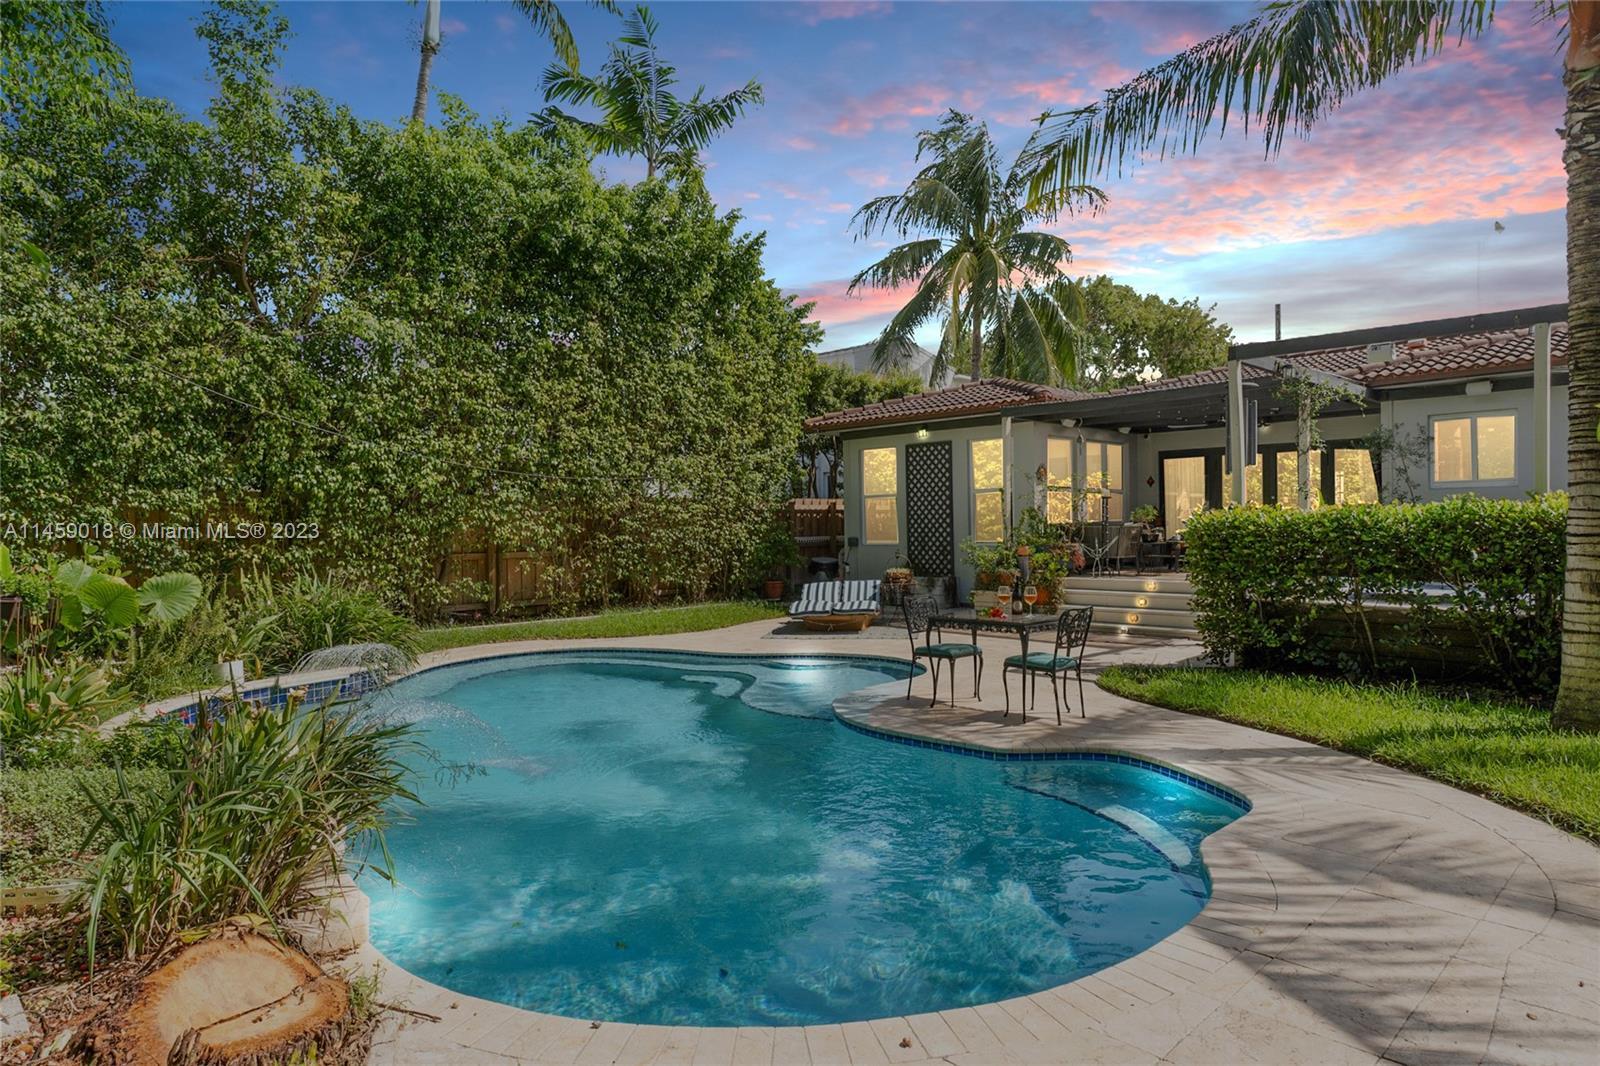 This charming 3 bed + office, 3 bath Mediterranean home is the epitome of lush Miami Beach living. A